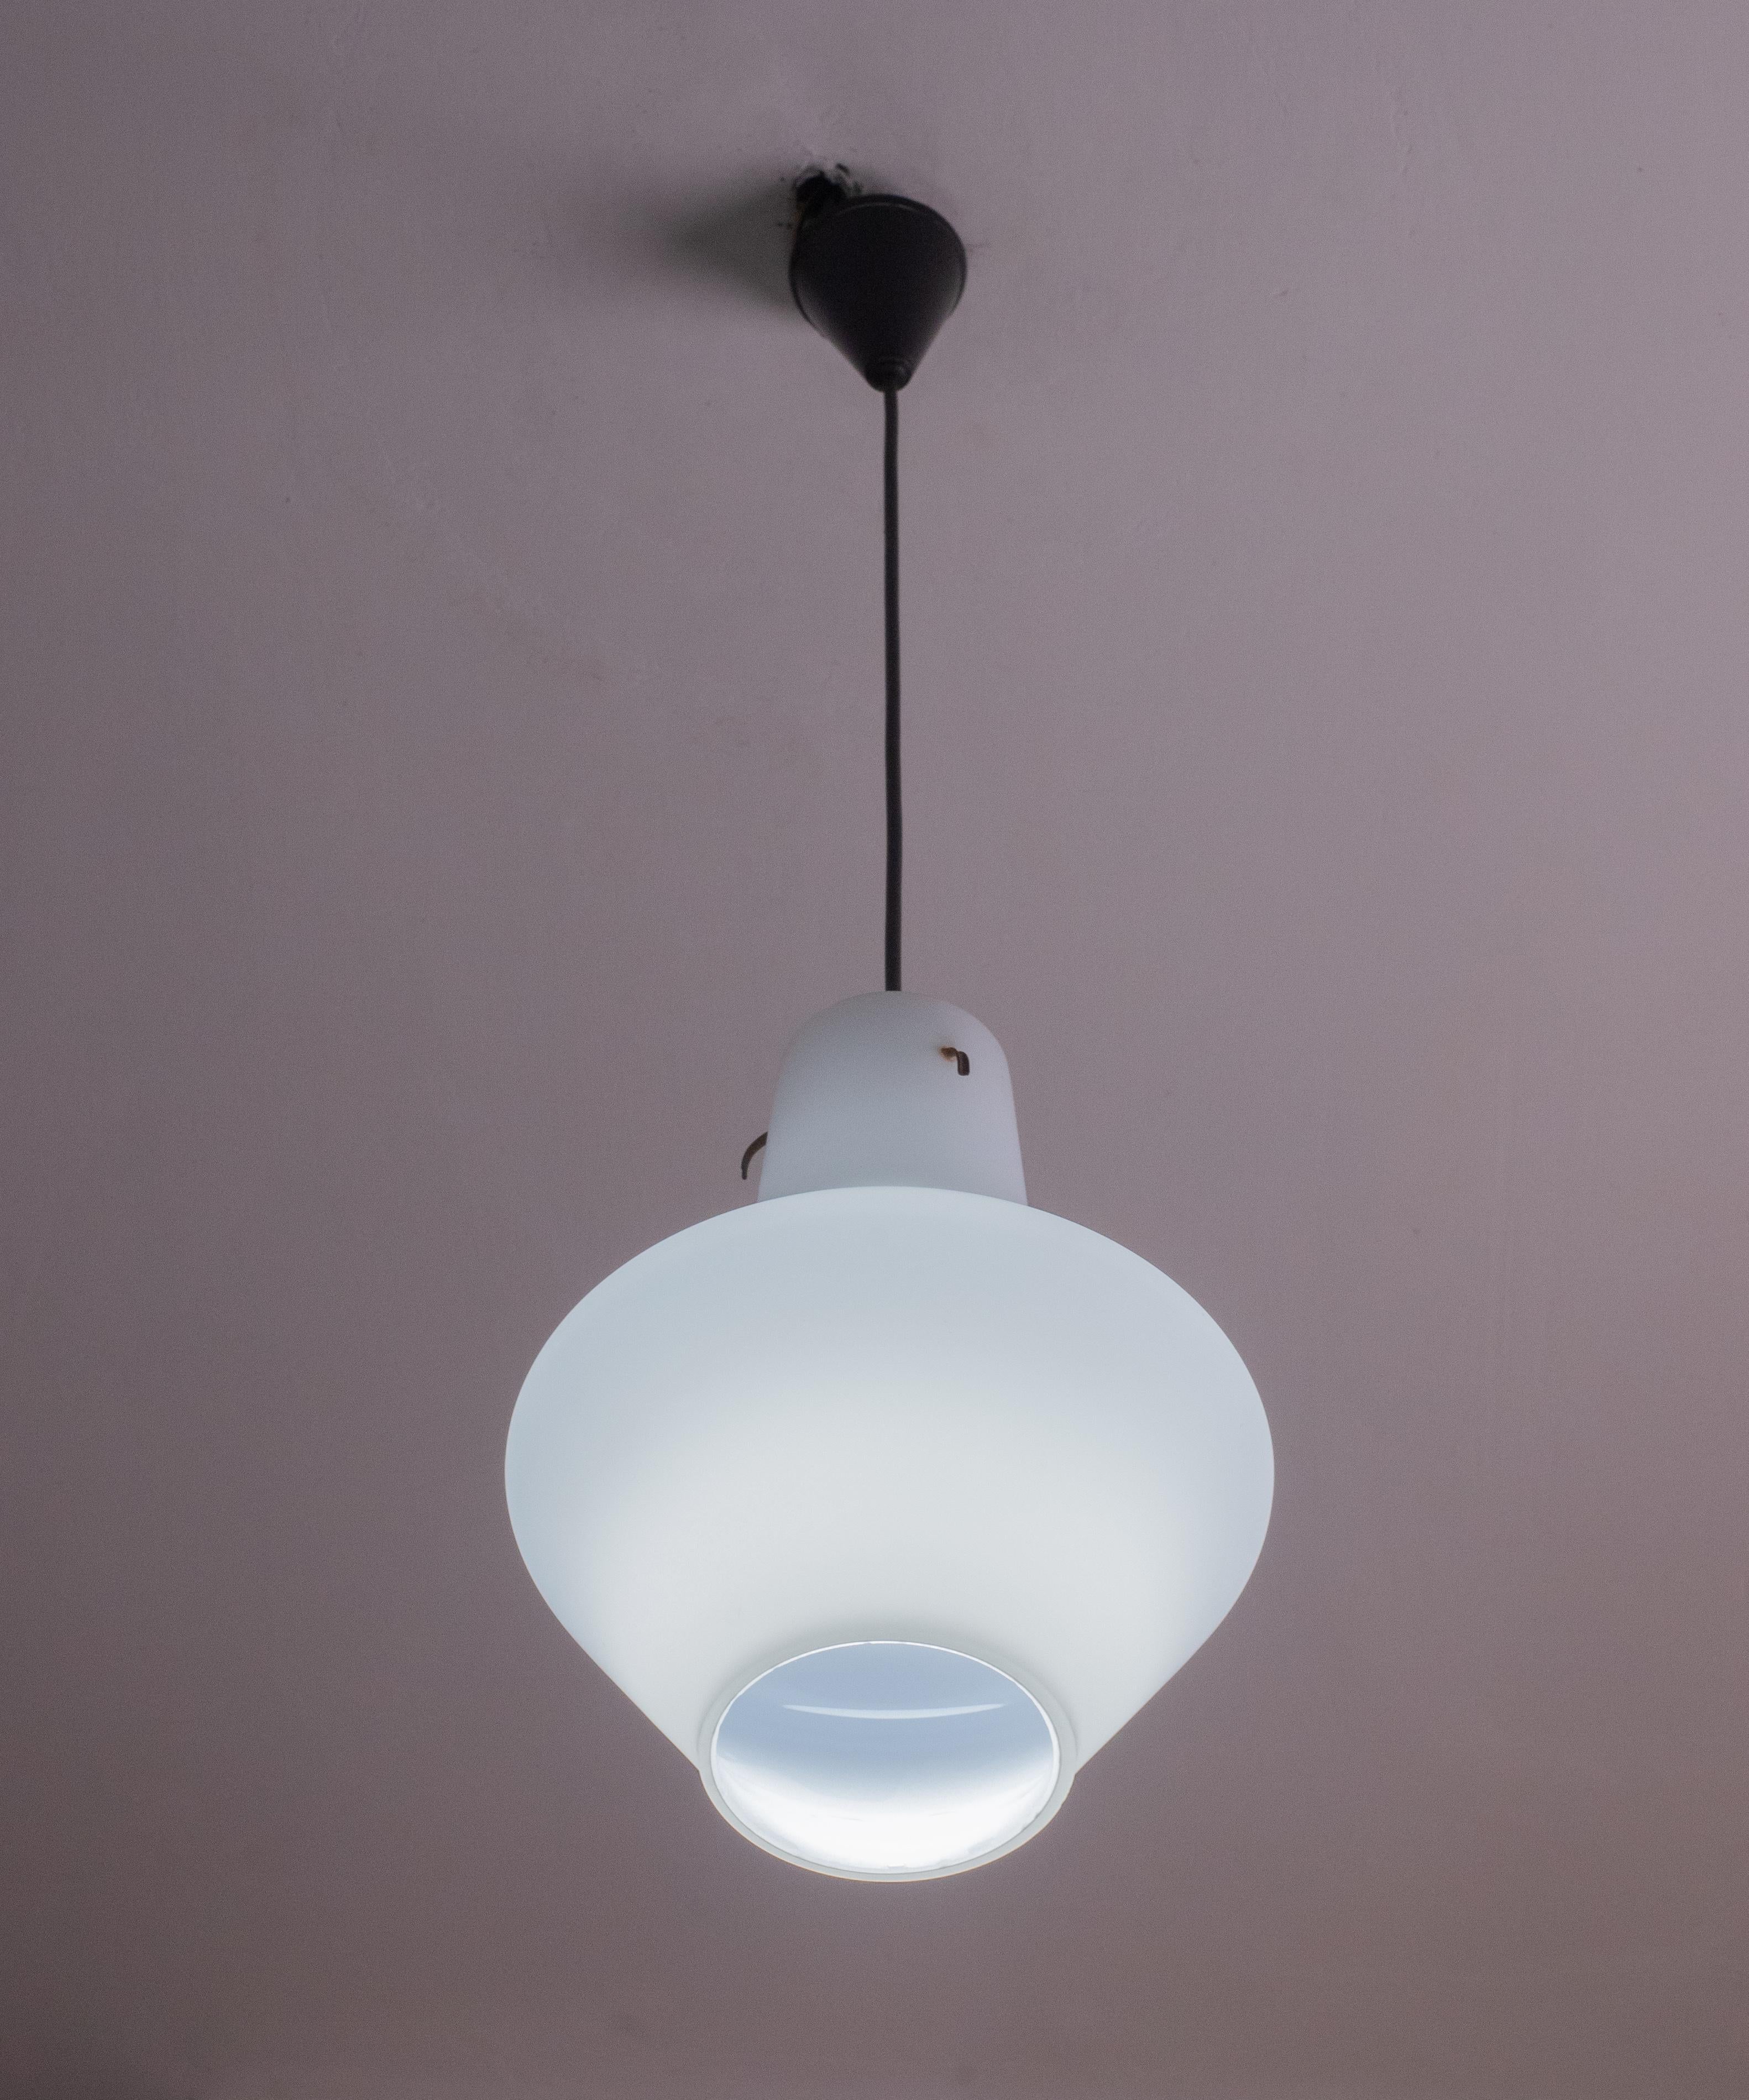 Stilnovo-designed opal glass pendant made in the 1970s.
The canopy is made of white opal glass. The pendant is ideal for decorating vintage industrial spaces and above a prominent table or kitchen island.
The lamp mounts a standard European e27